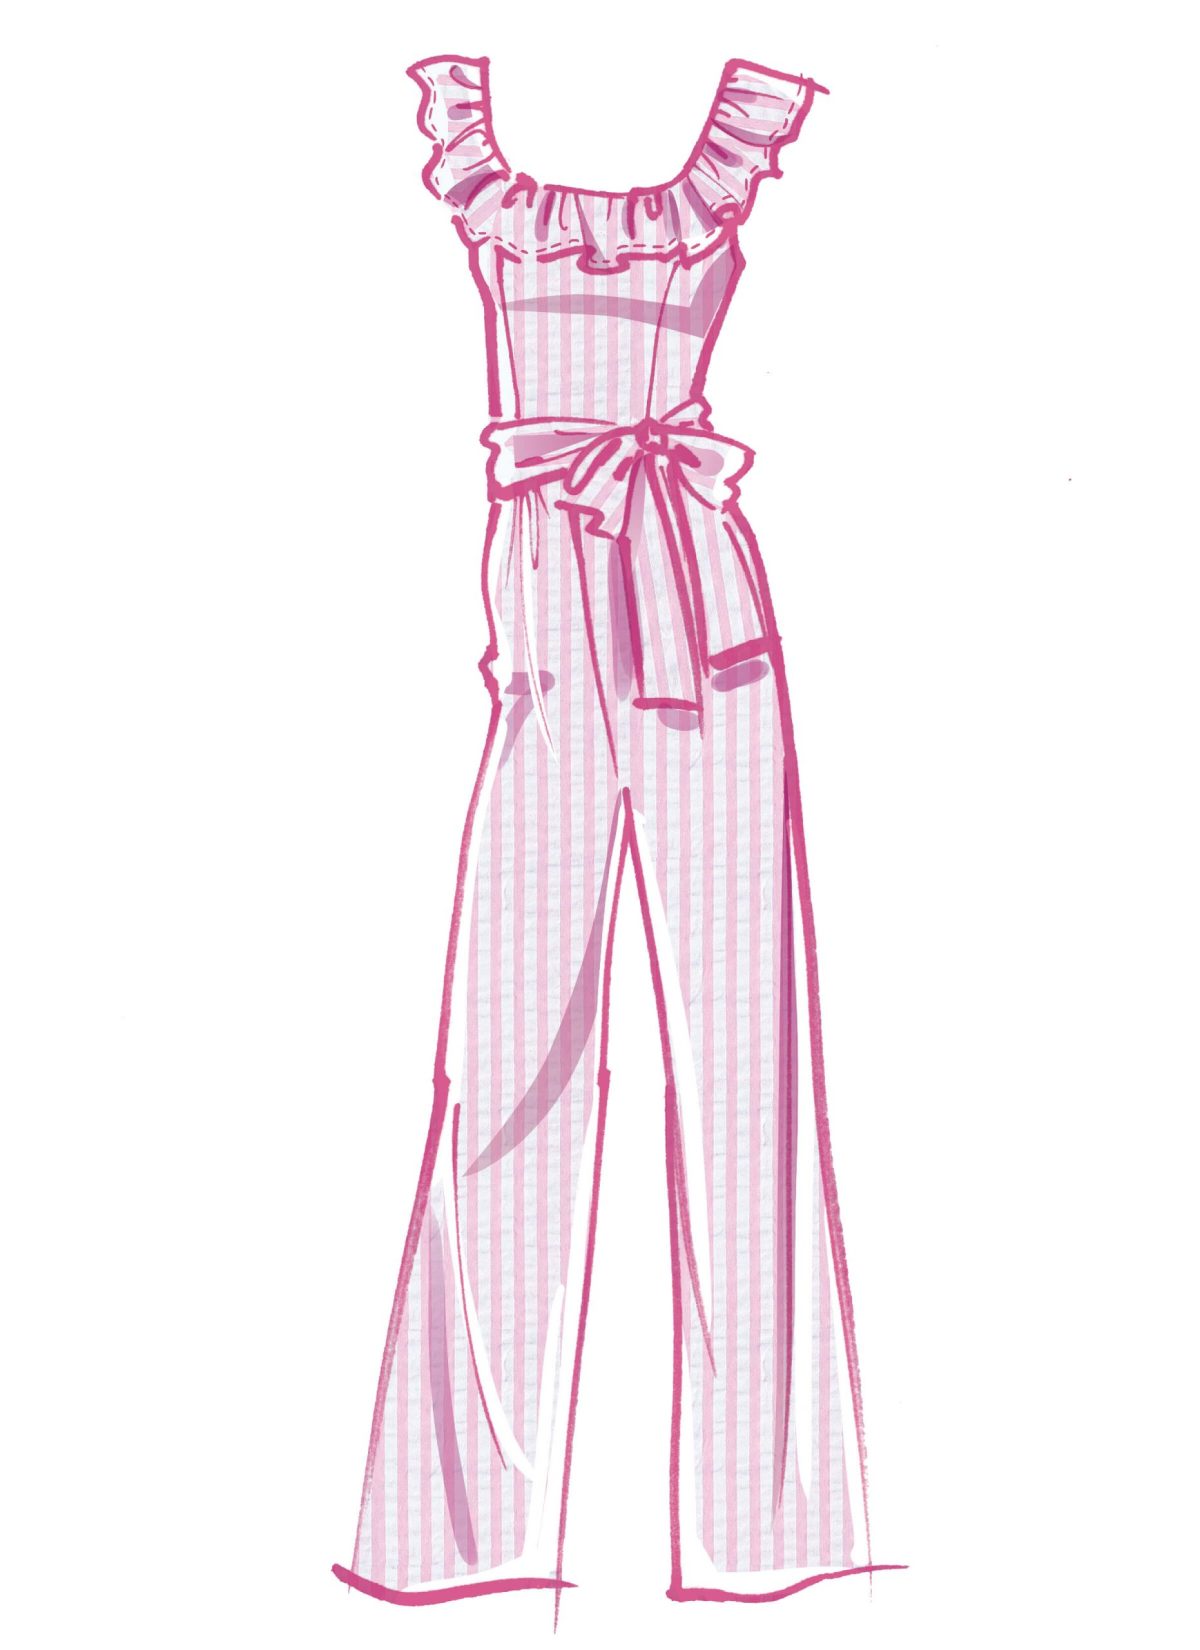 McCall's Sewing Pattern M8203 Misses' Romper, Jumpsuits & Sash